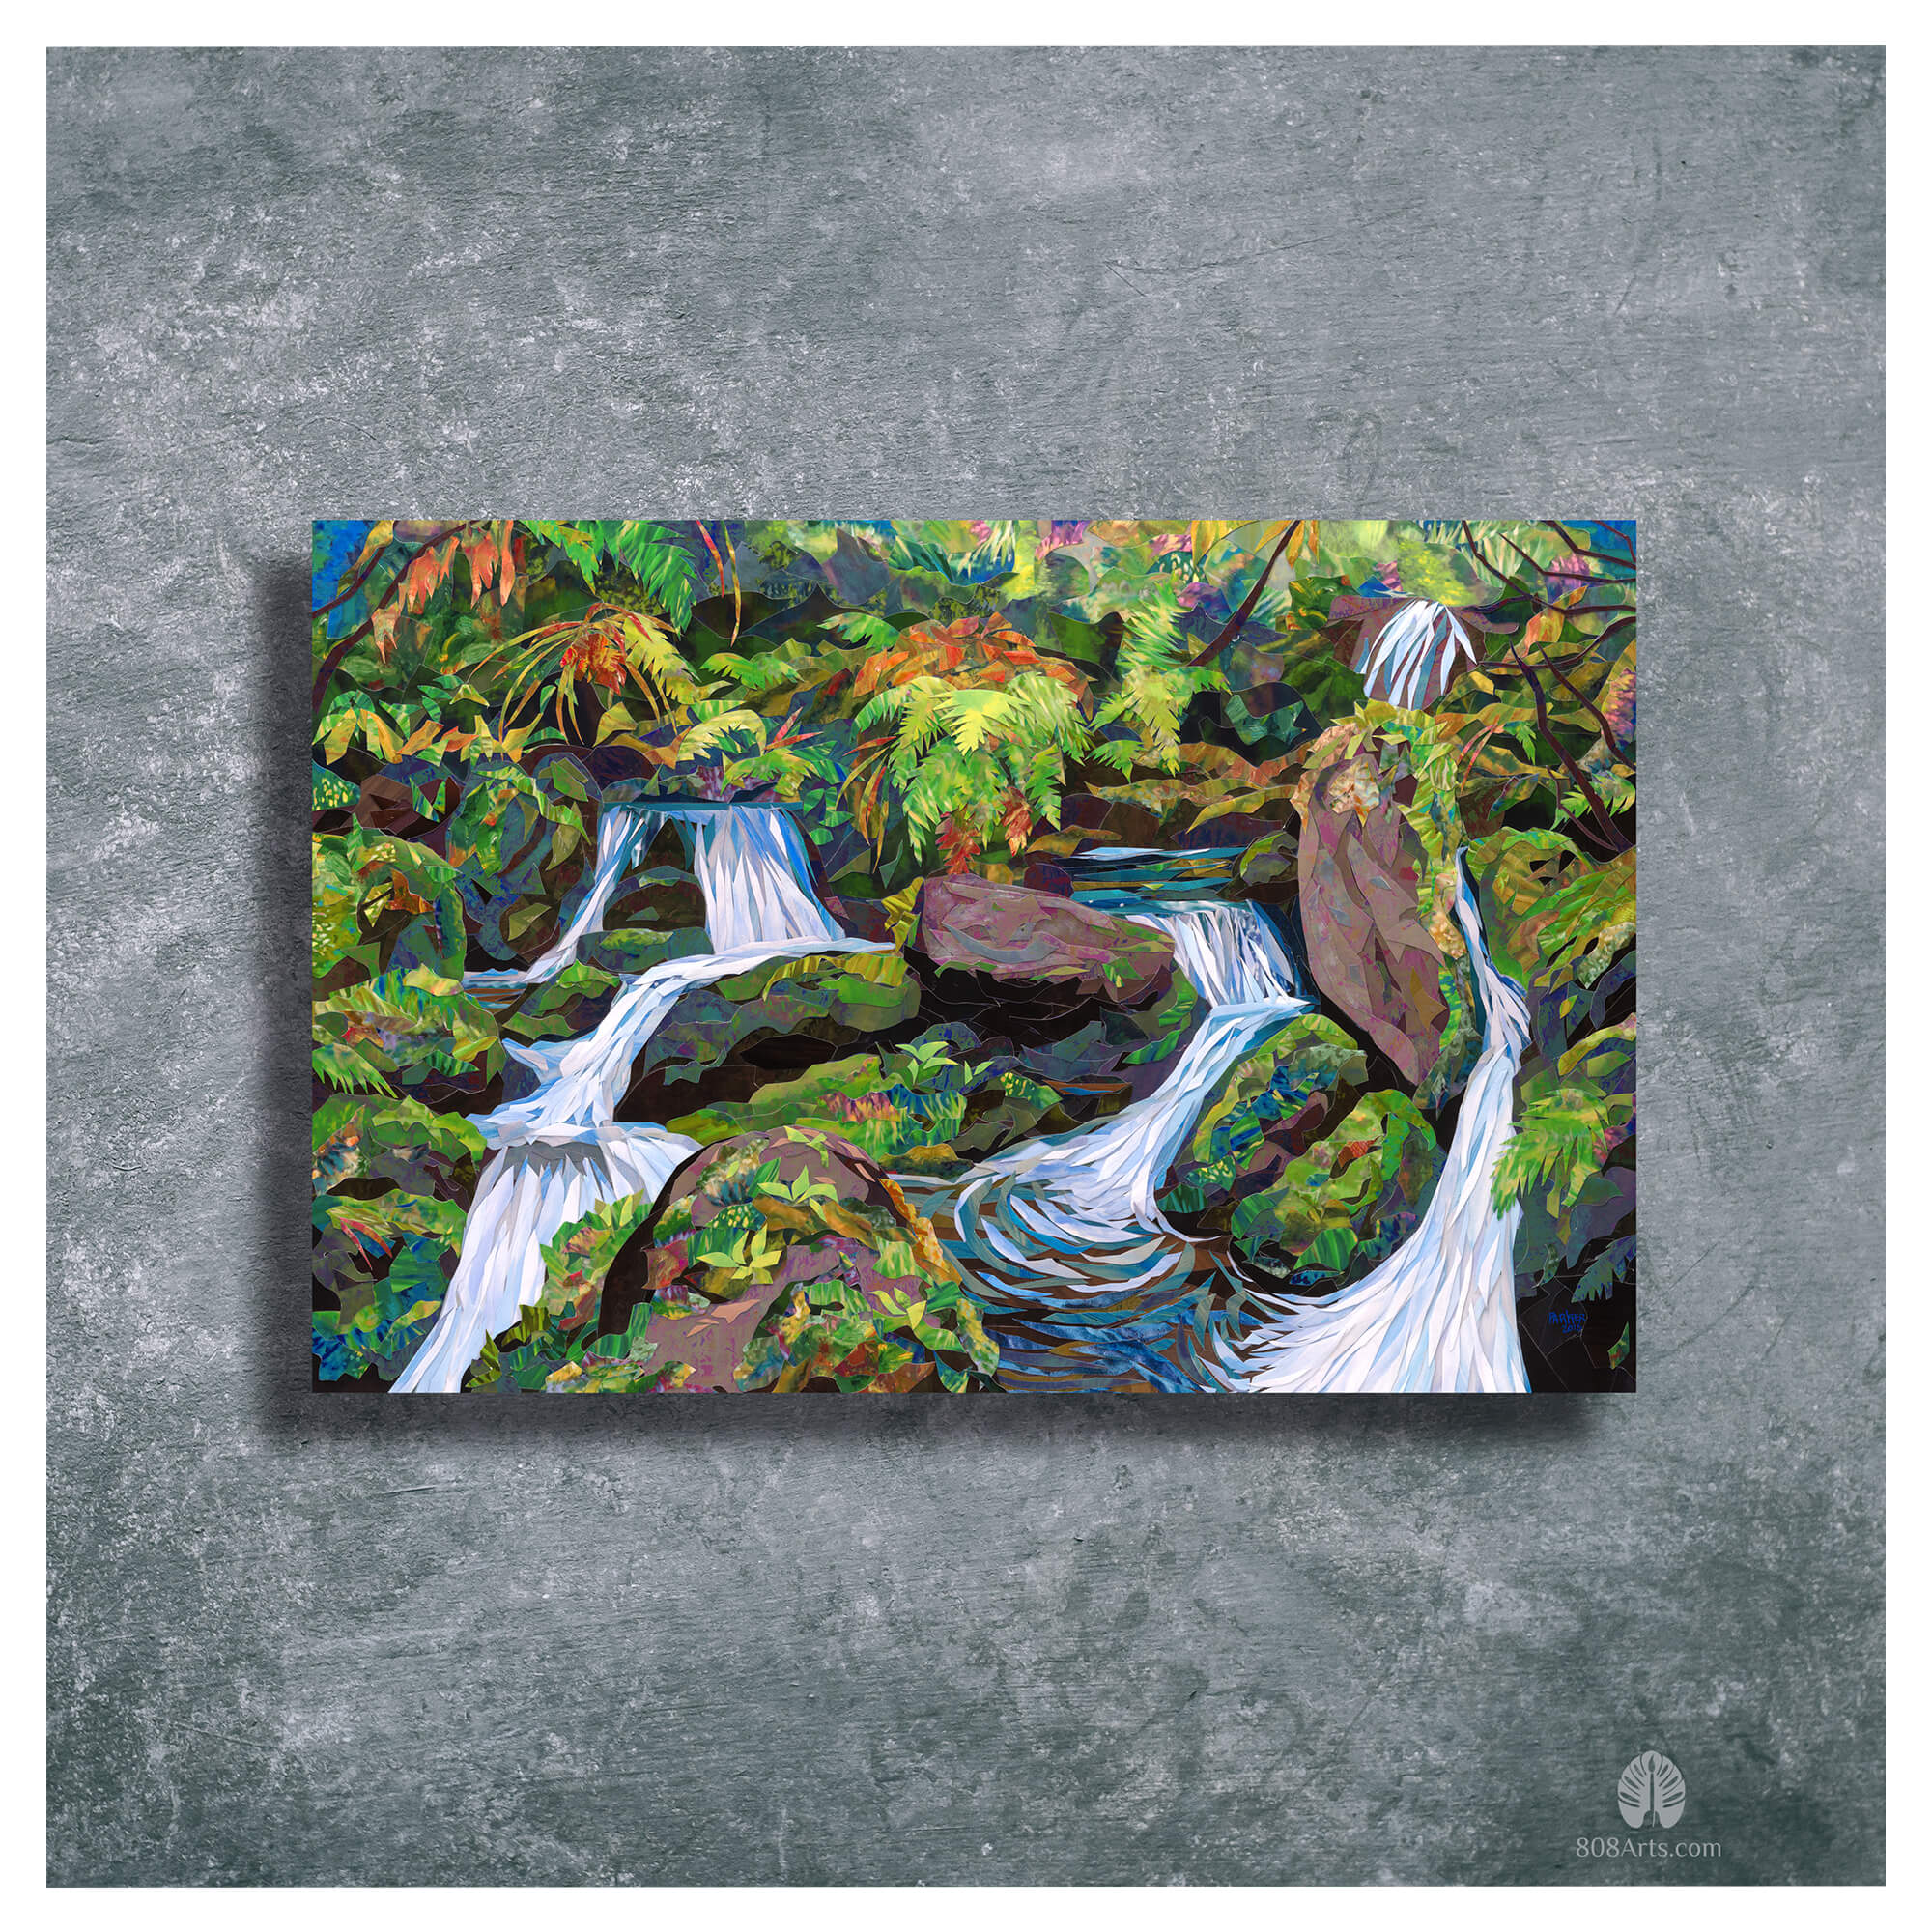 A metal art print featuring a collage of colorful streams of water surrounded by tropical plants, by Maui artist Patrick Parker